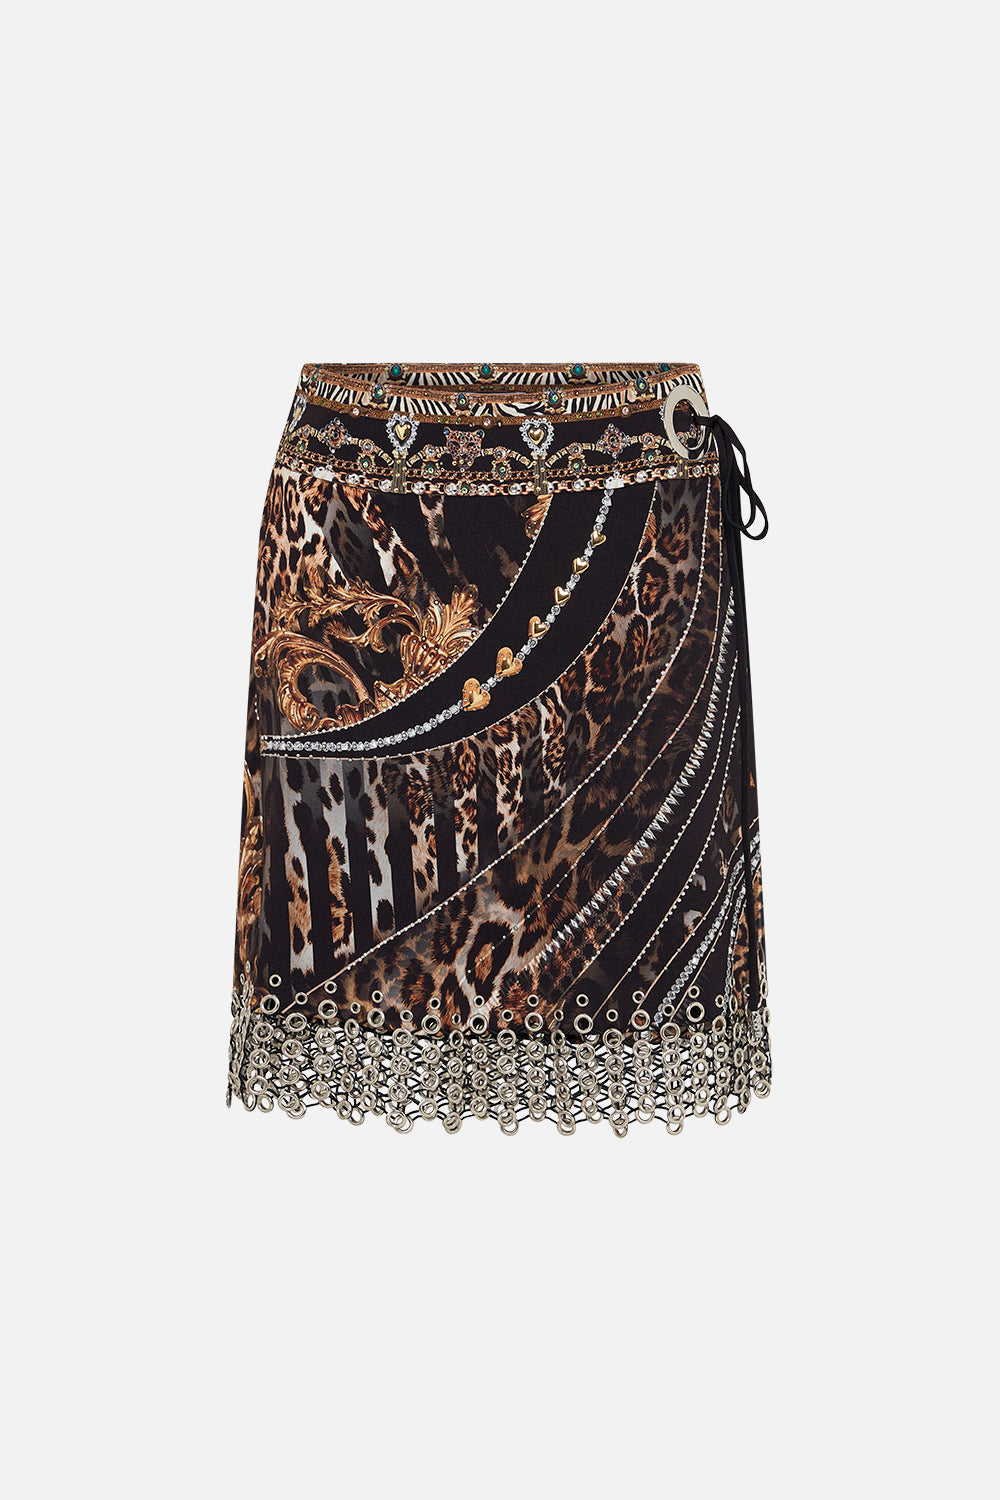 Product view of CAMILLA embellished mini skirt in Chaos In The Cosmos animal print